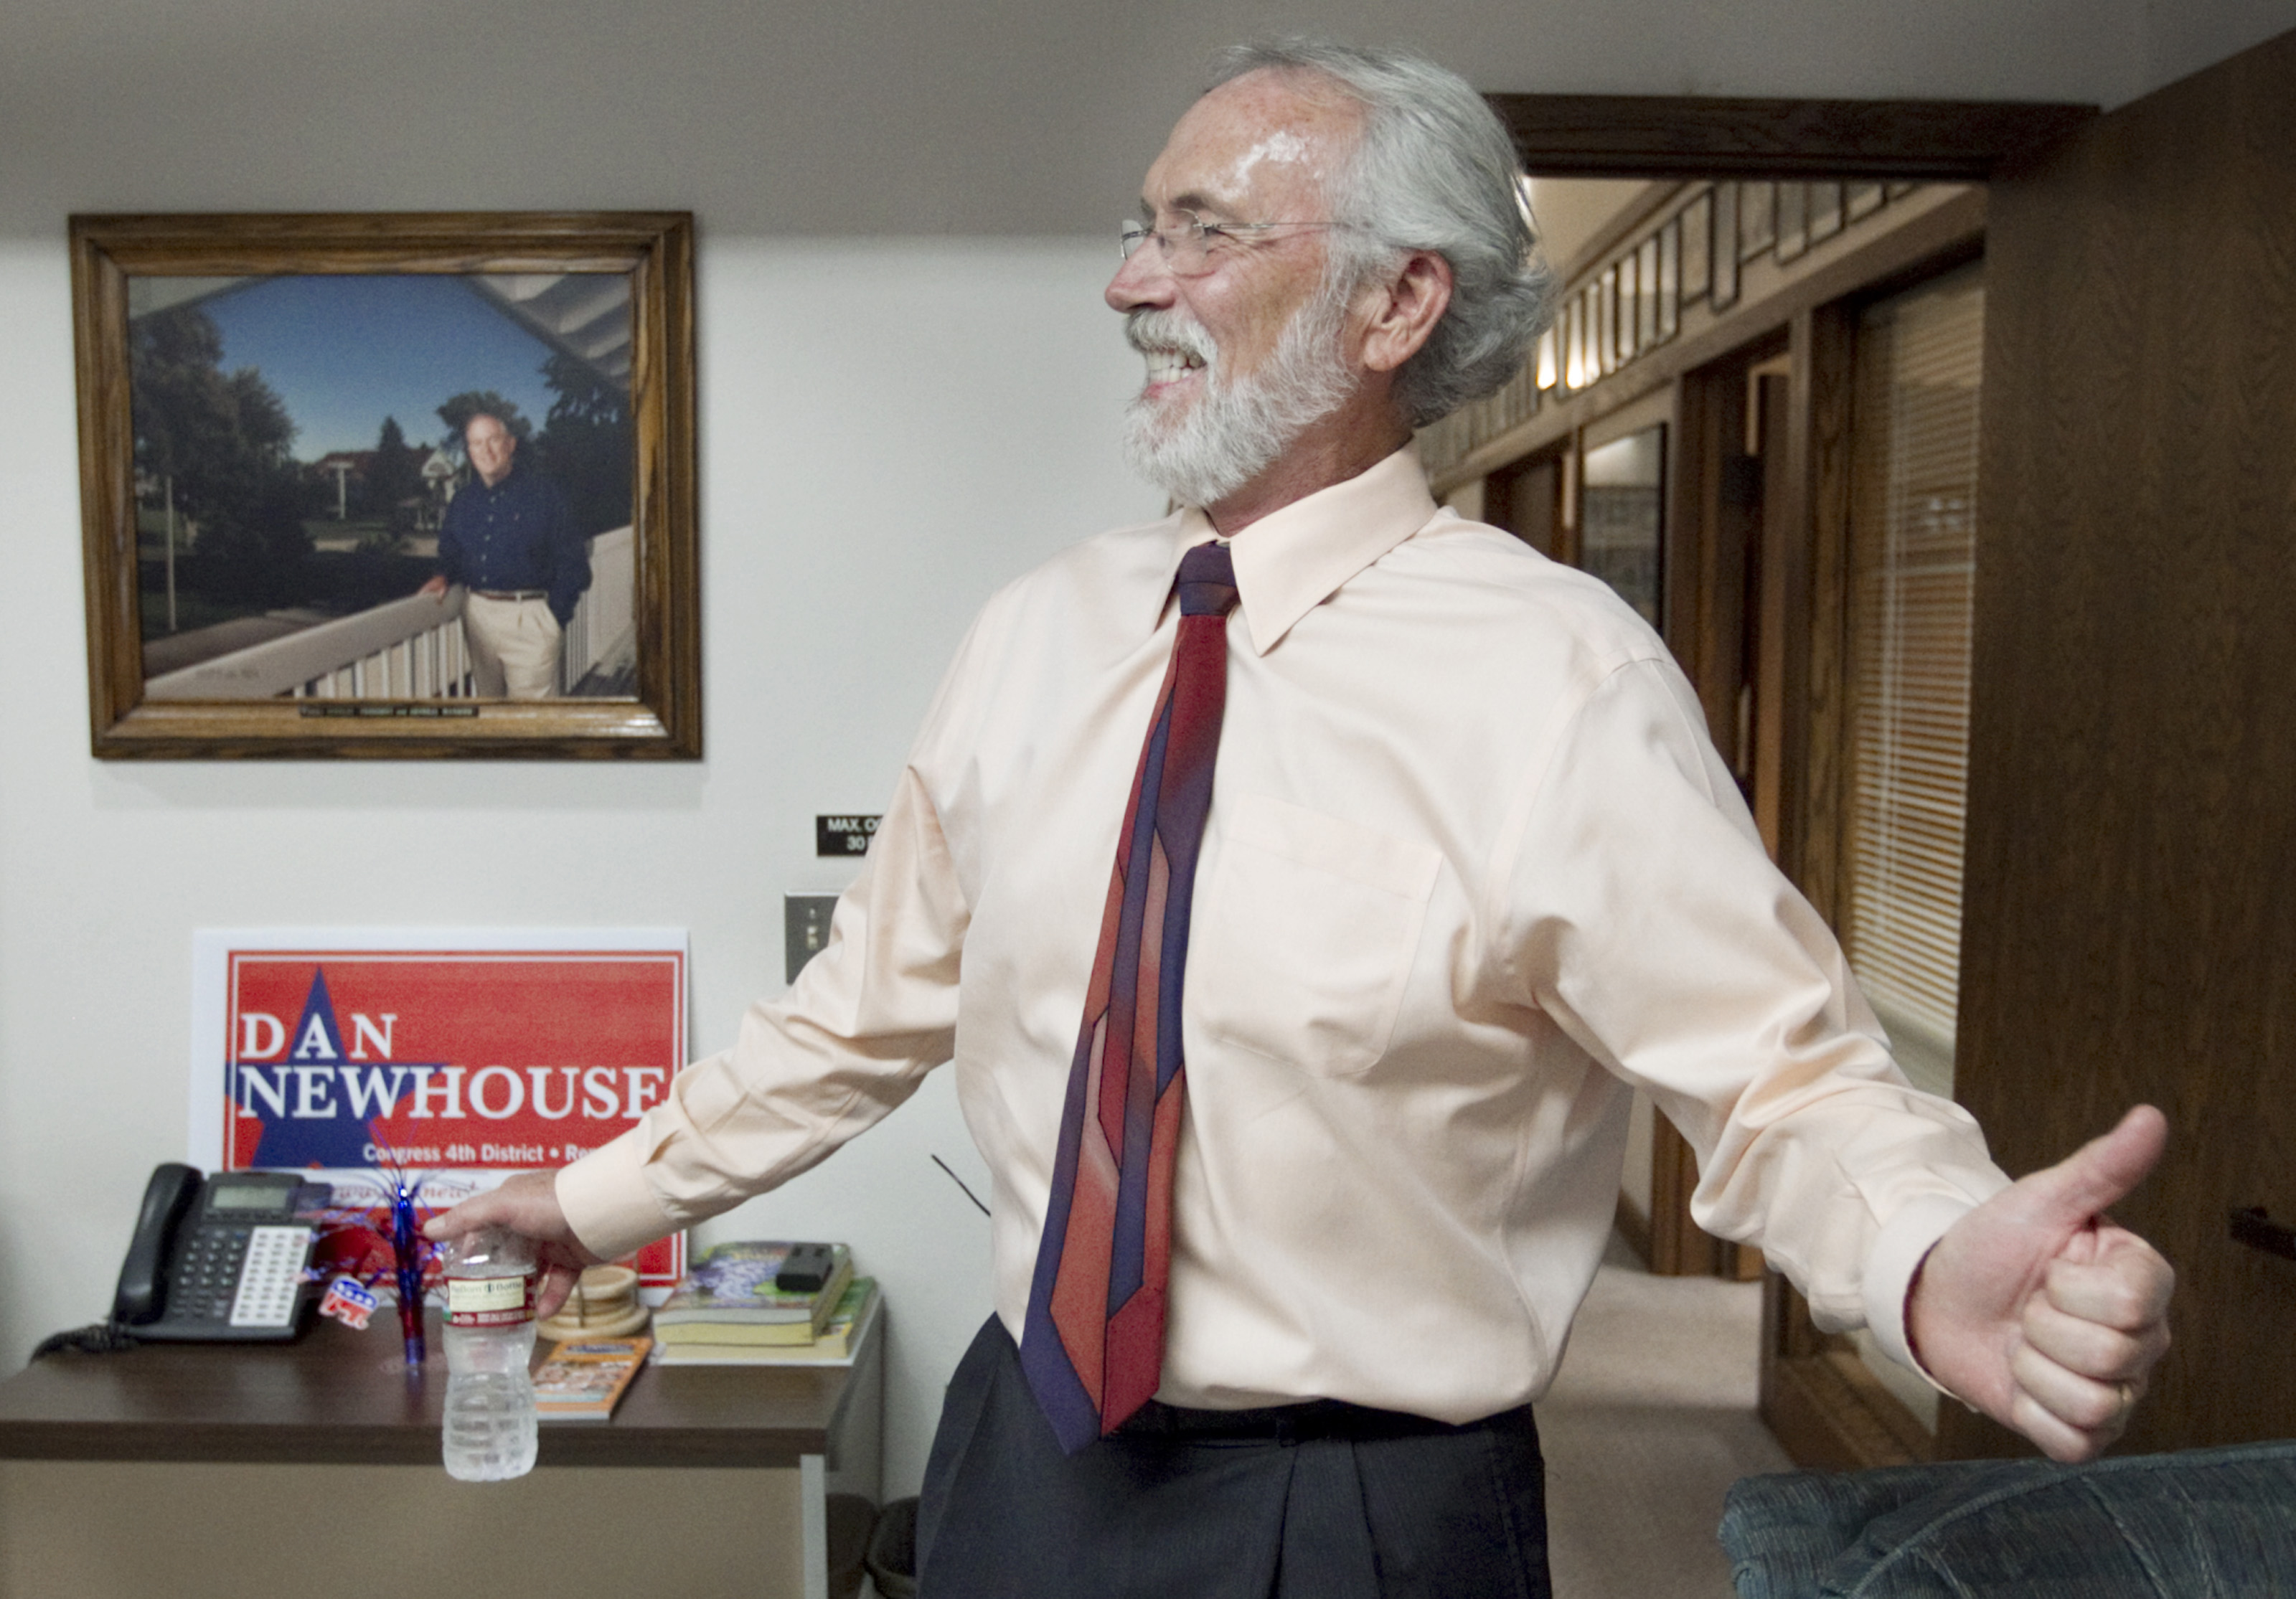 Fourth Congressional District candidate Dan Newhouse smiles after learning Aug. 5, 2014 in Yakima, Wash. that he was one of the top two finishers in the congressional primary. (Gordon King—Yakima Herald-Republic/AP)